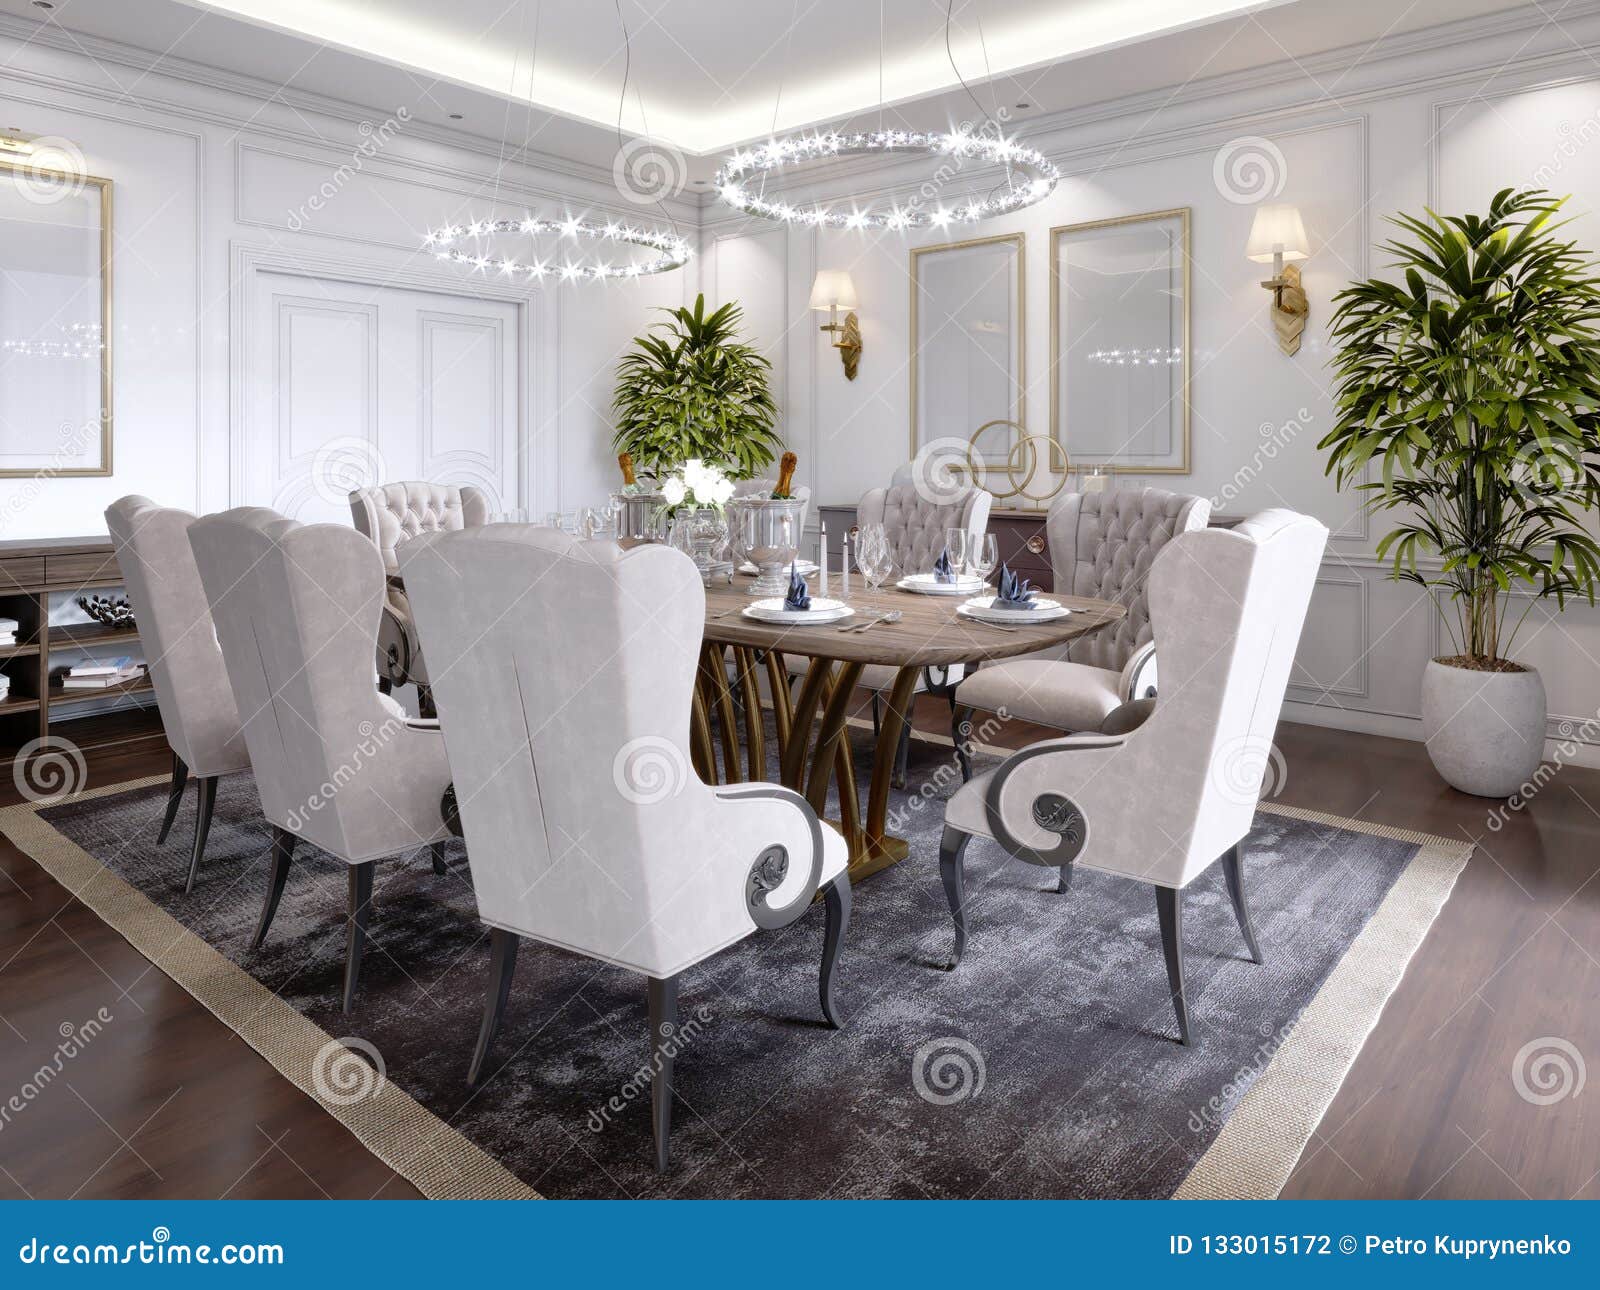 Large Dining Table for Eight People in the Dining Room Classic Style ...